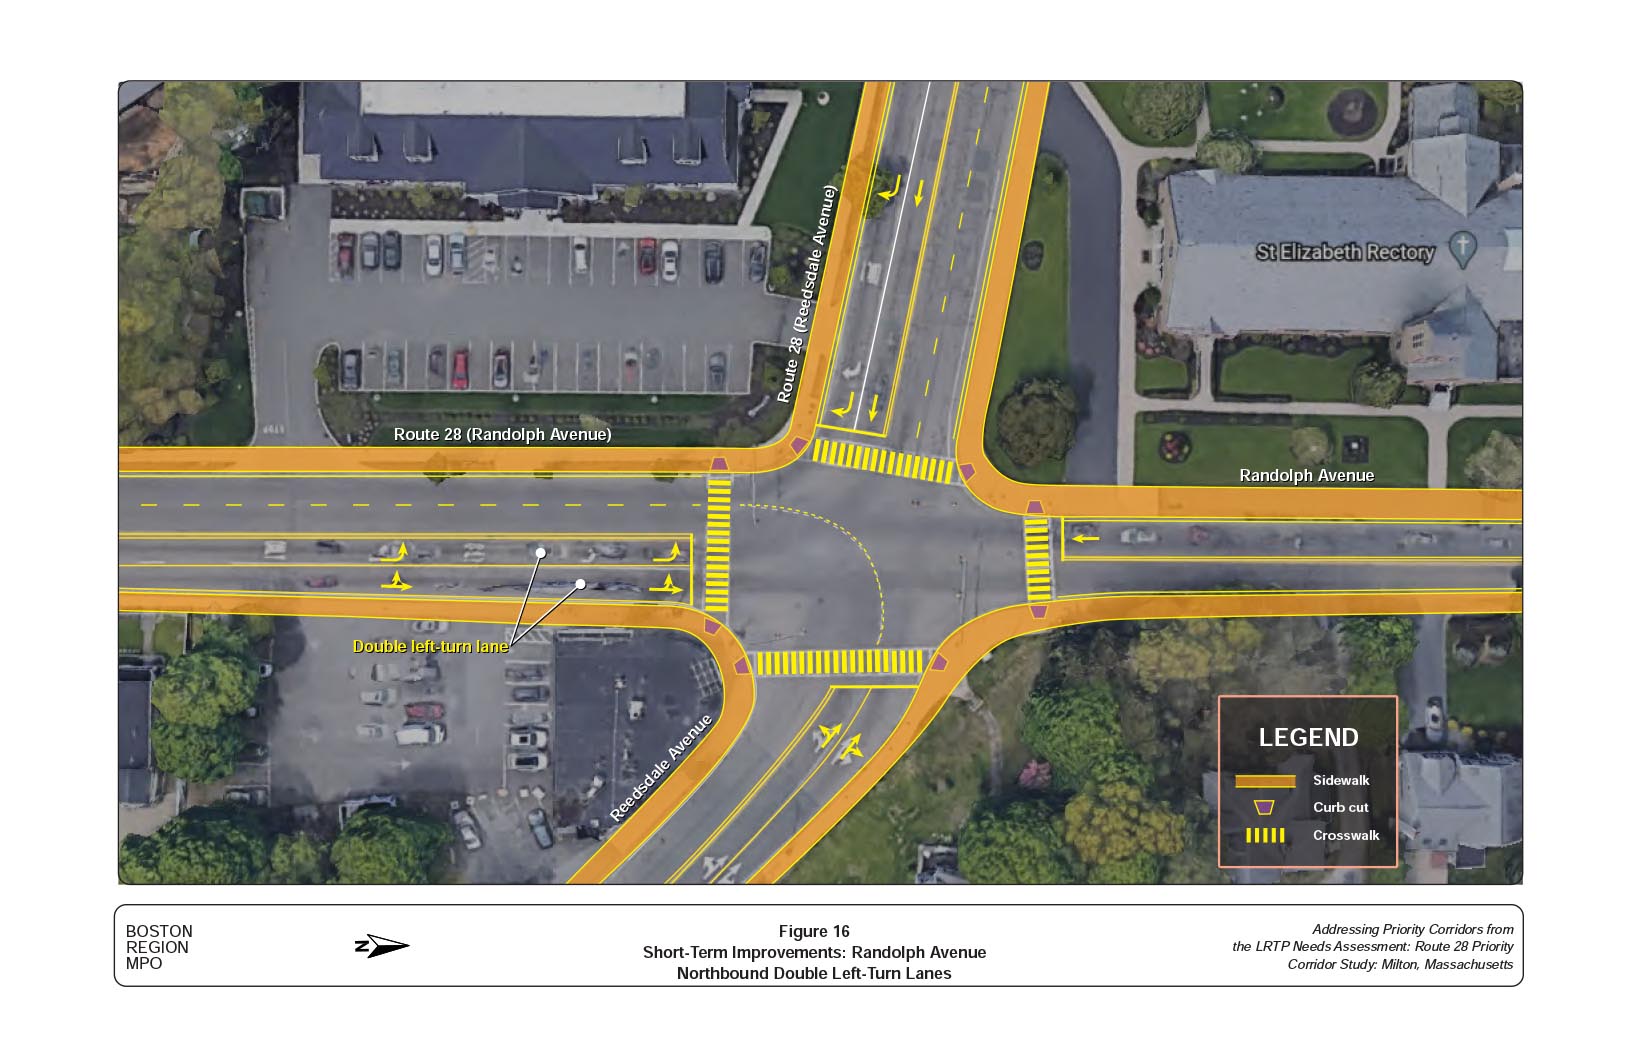 Figure 16
Short-Term Improvements: Randolph Avenue Northbound Double Left-Turn Lanes
Figure 16 is a layout of the short-term improvement concept for Randolph Avenue and Reedsdale Road showing northbound double left-turn lanes.

